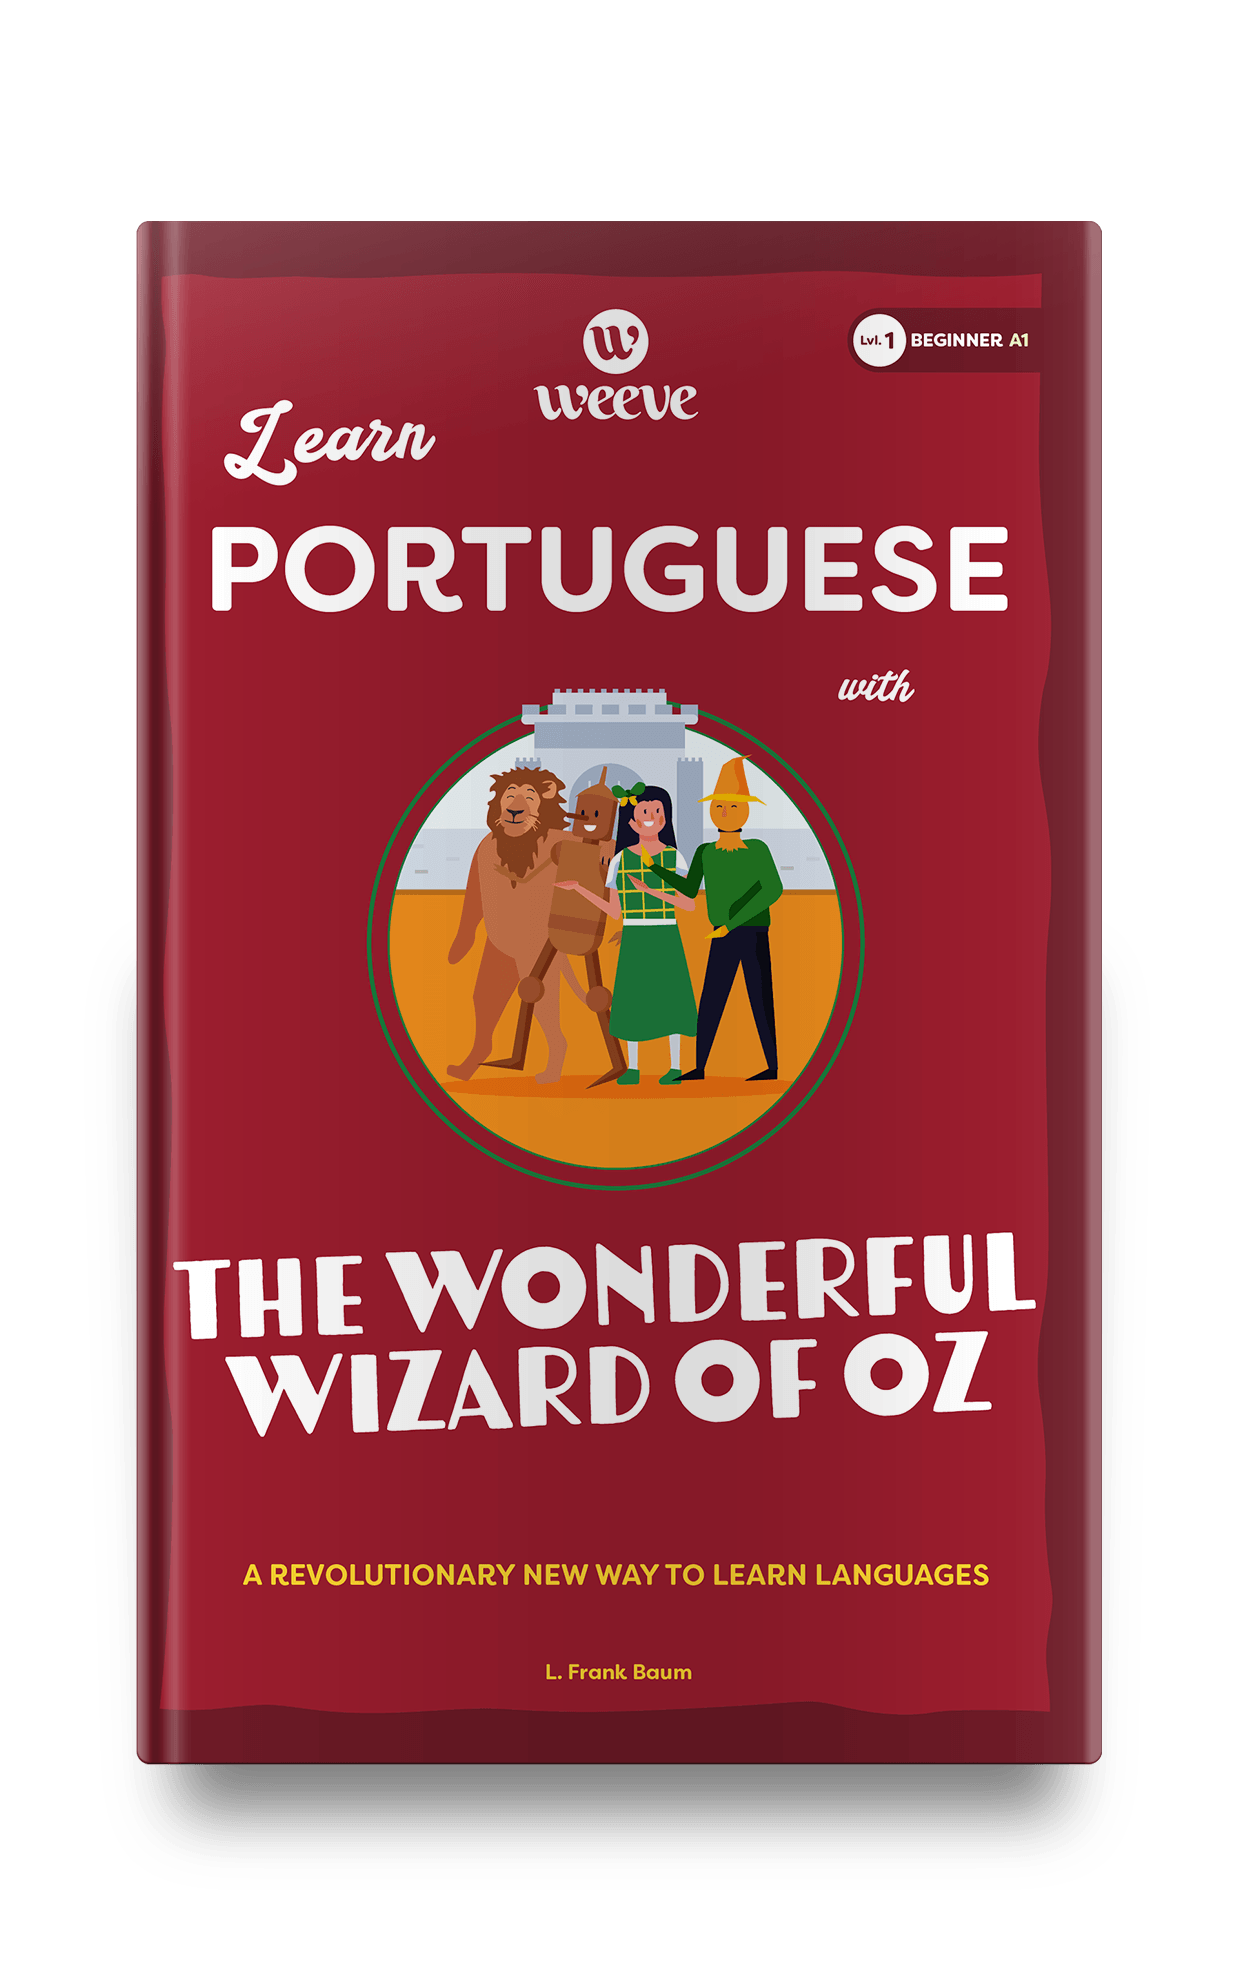 Learn Portuguese with the Wonderful Wizard Of Oz - Weeve